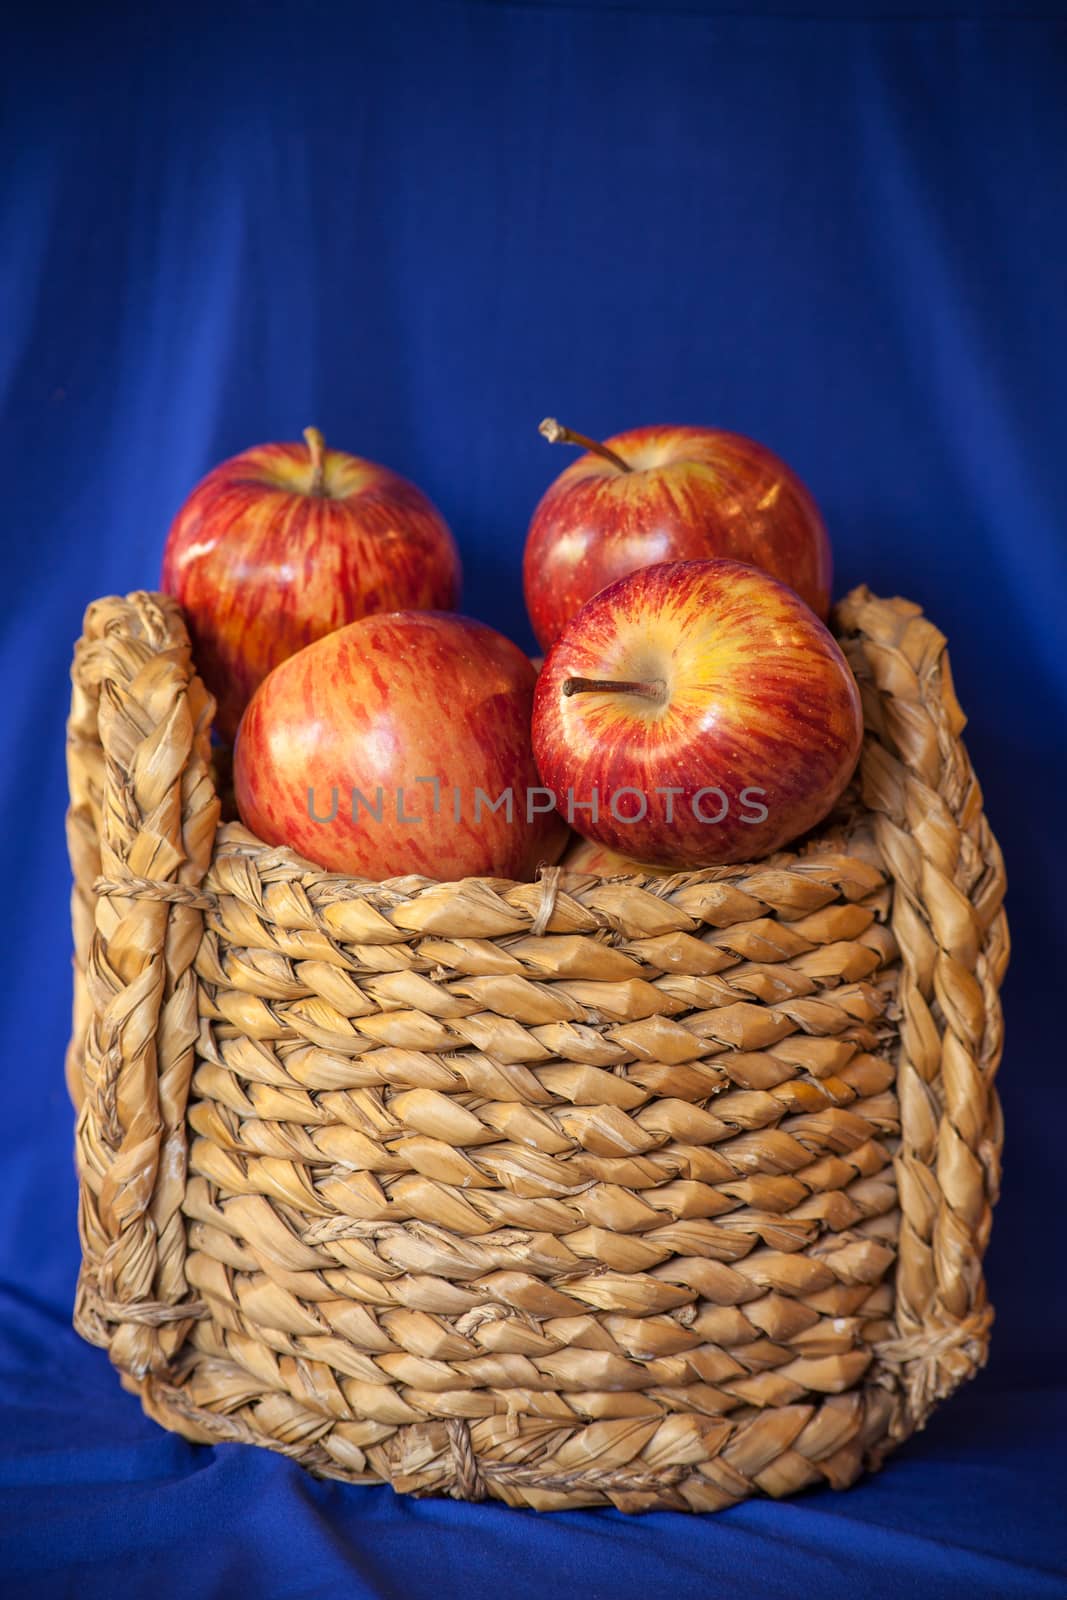 A grass  basket of red Starking apples 1 by kobus_peche